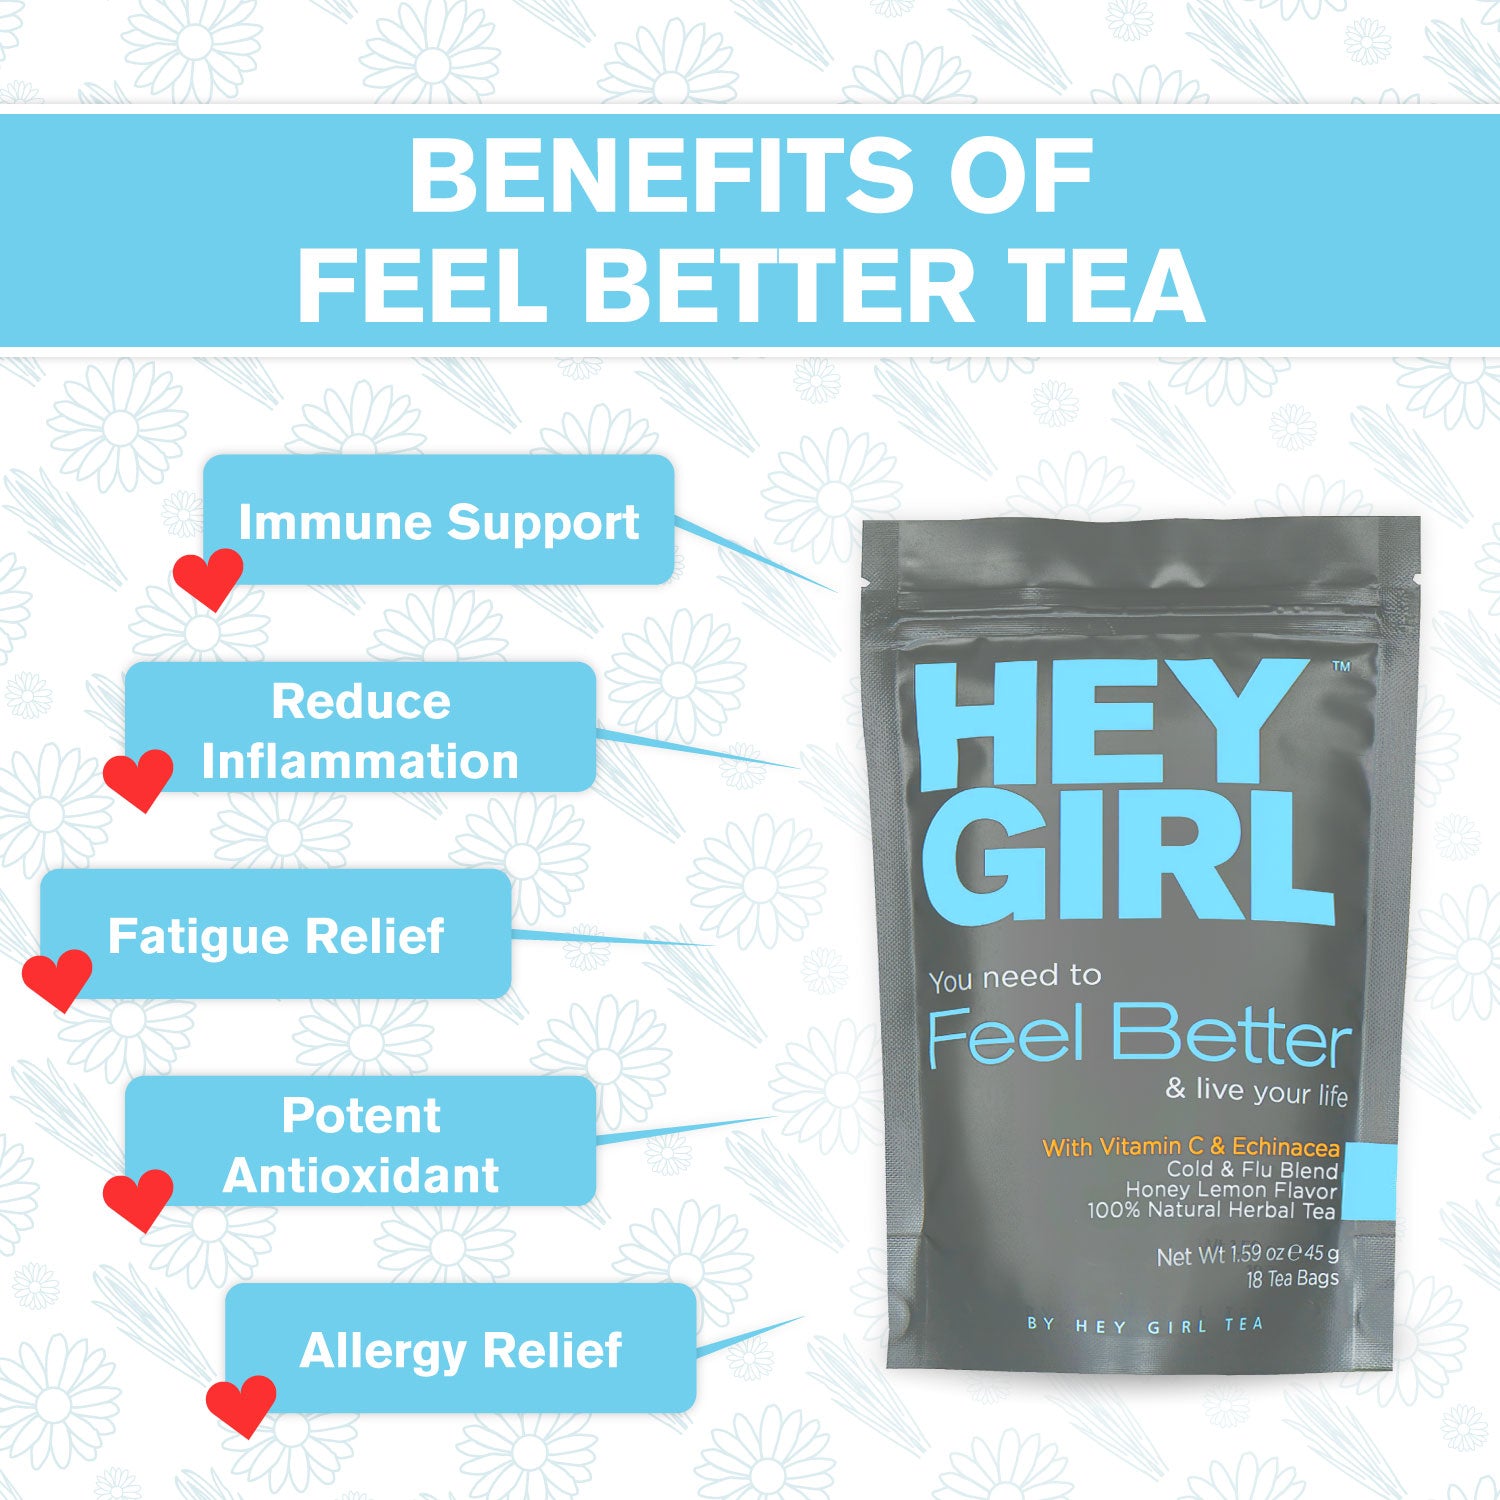 Feel Better Herbal Tea Bags Get Well Soon Gifts for Women Sick Care Package Immune Support Elderberry Tea Ginger Echinacea Ginseng Vitamin C Caffeine Free